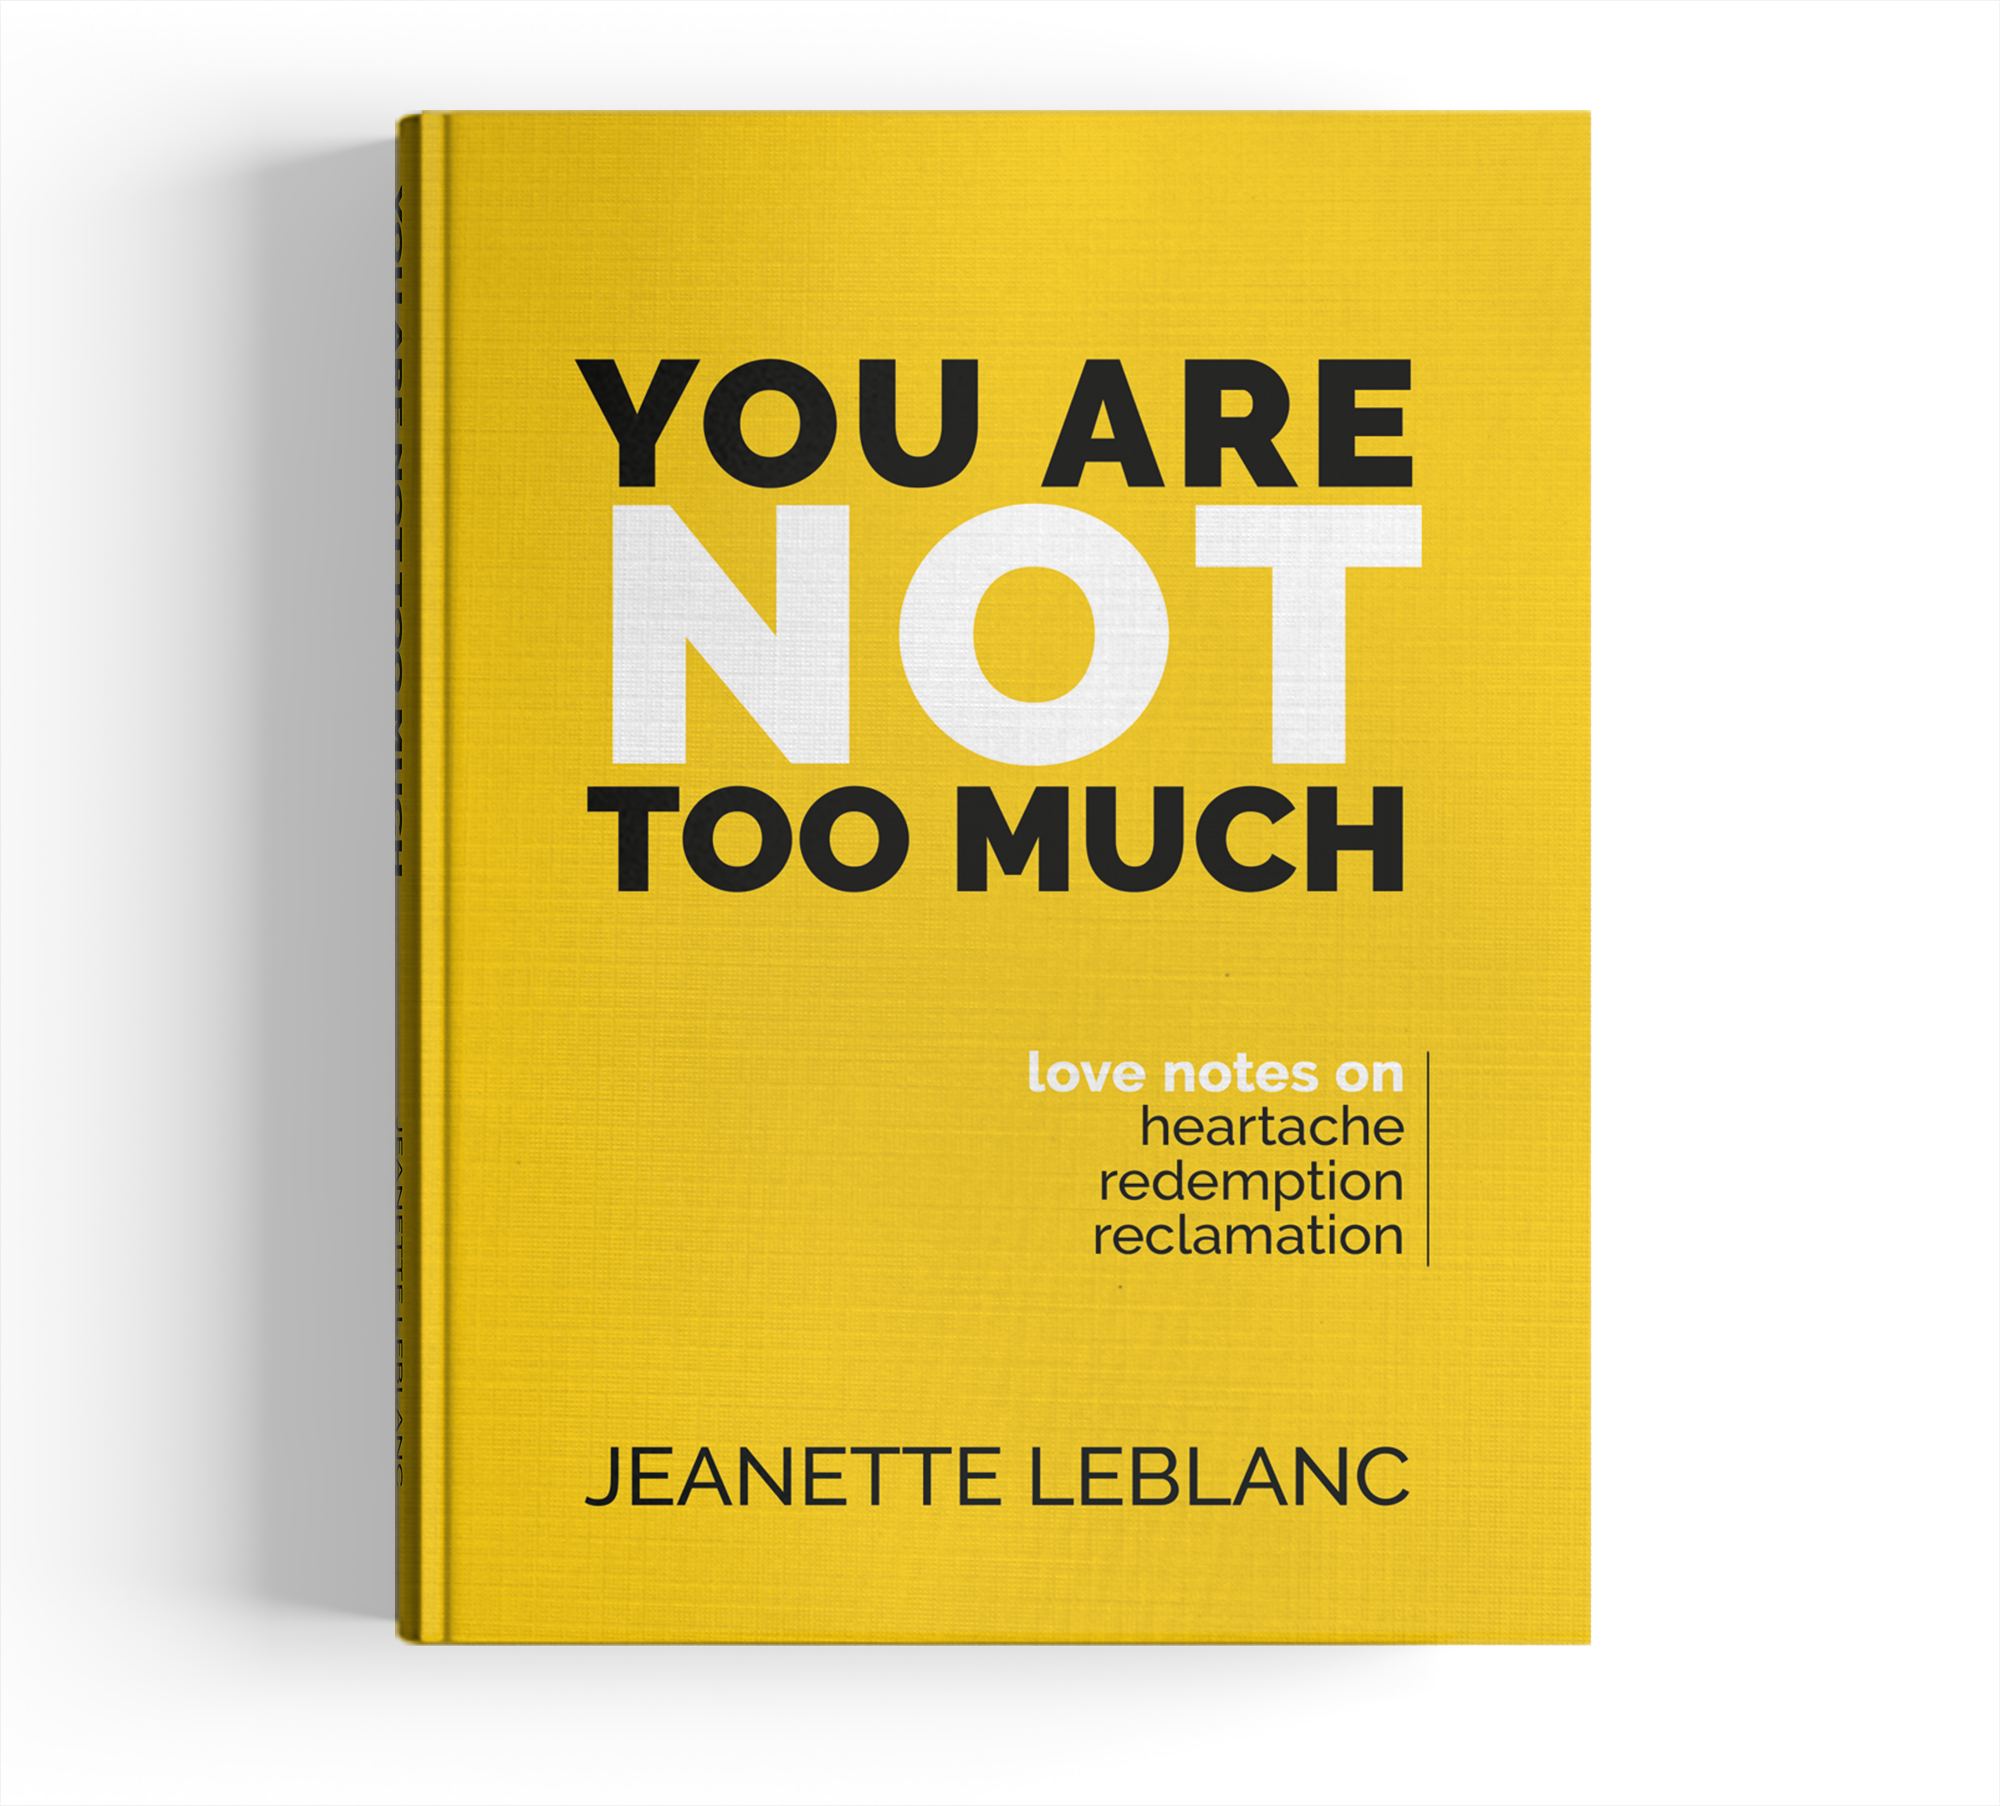 You Are Not Too Much: Love Notes On Heartache, Redemption & Reclamation - A book by Jeanette LeBlanc